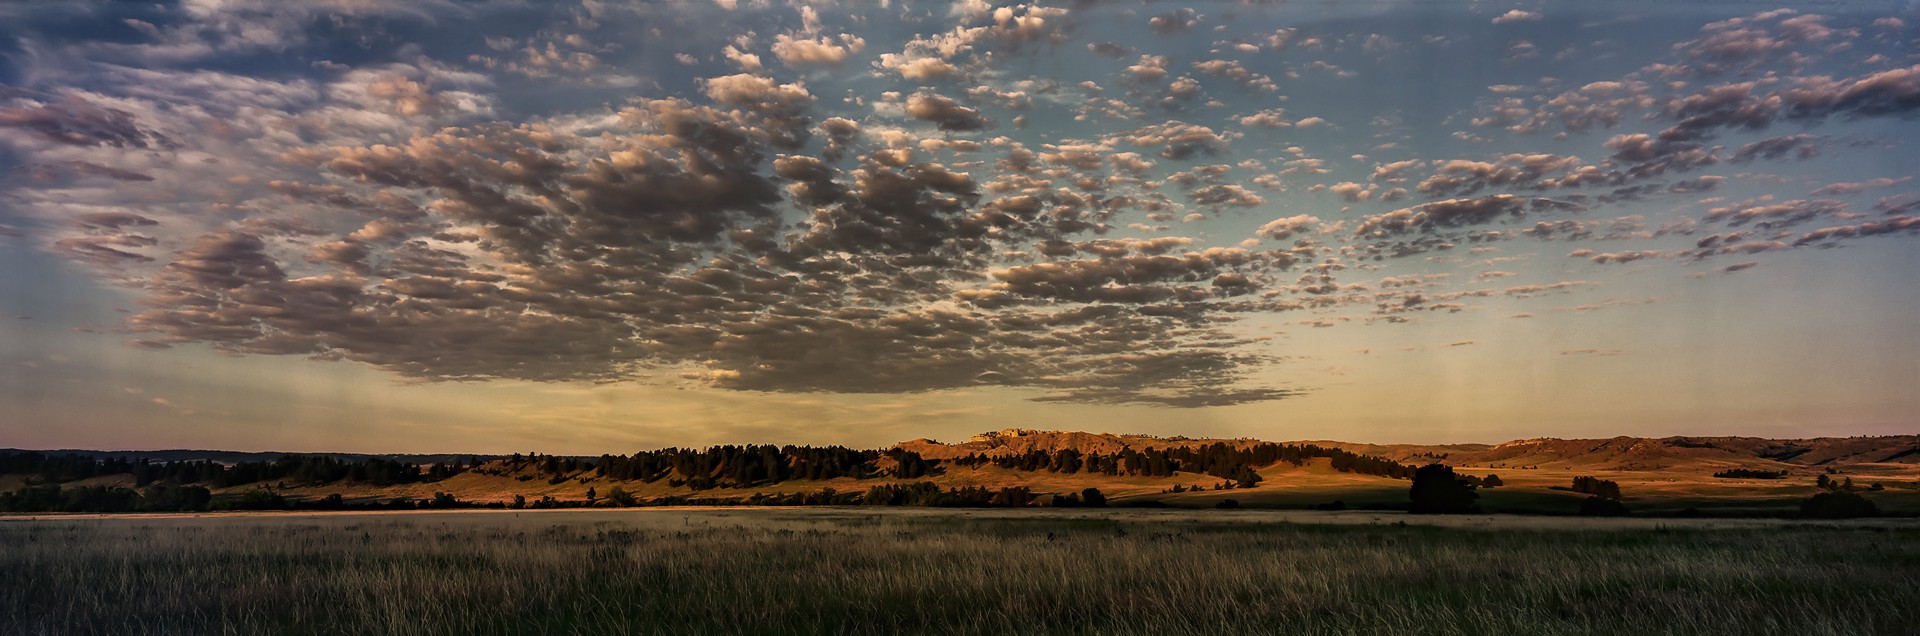 Sunset, Camp Robison, Near Where Crazy Horse Was Killed, Nebraska by Lawrence McFarland